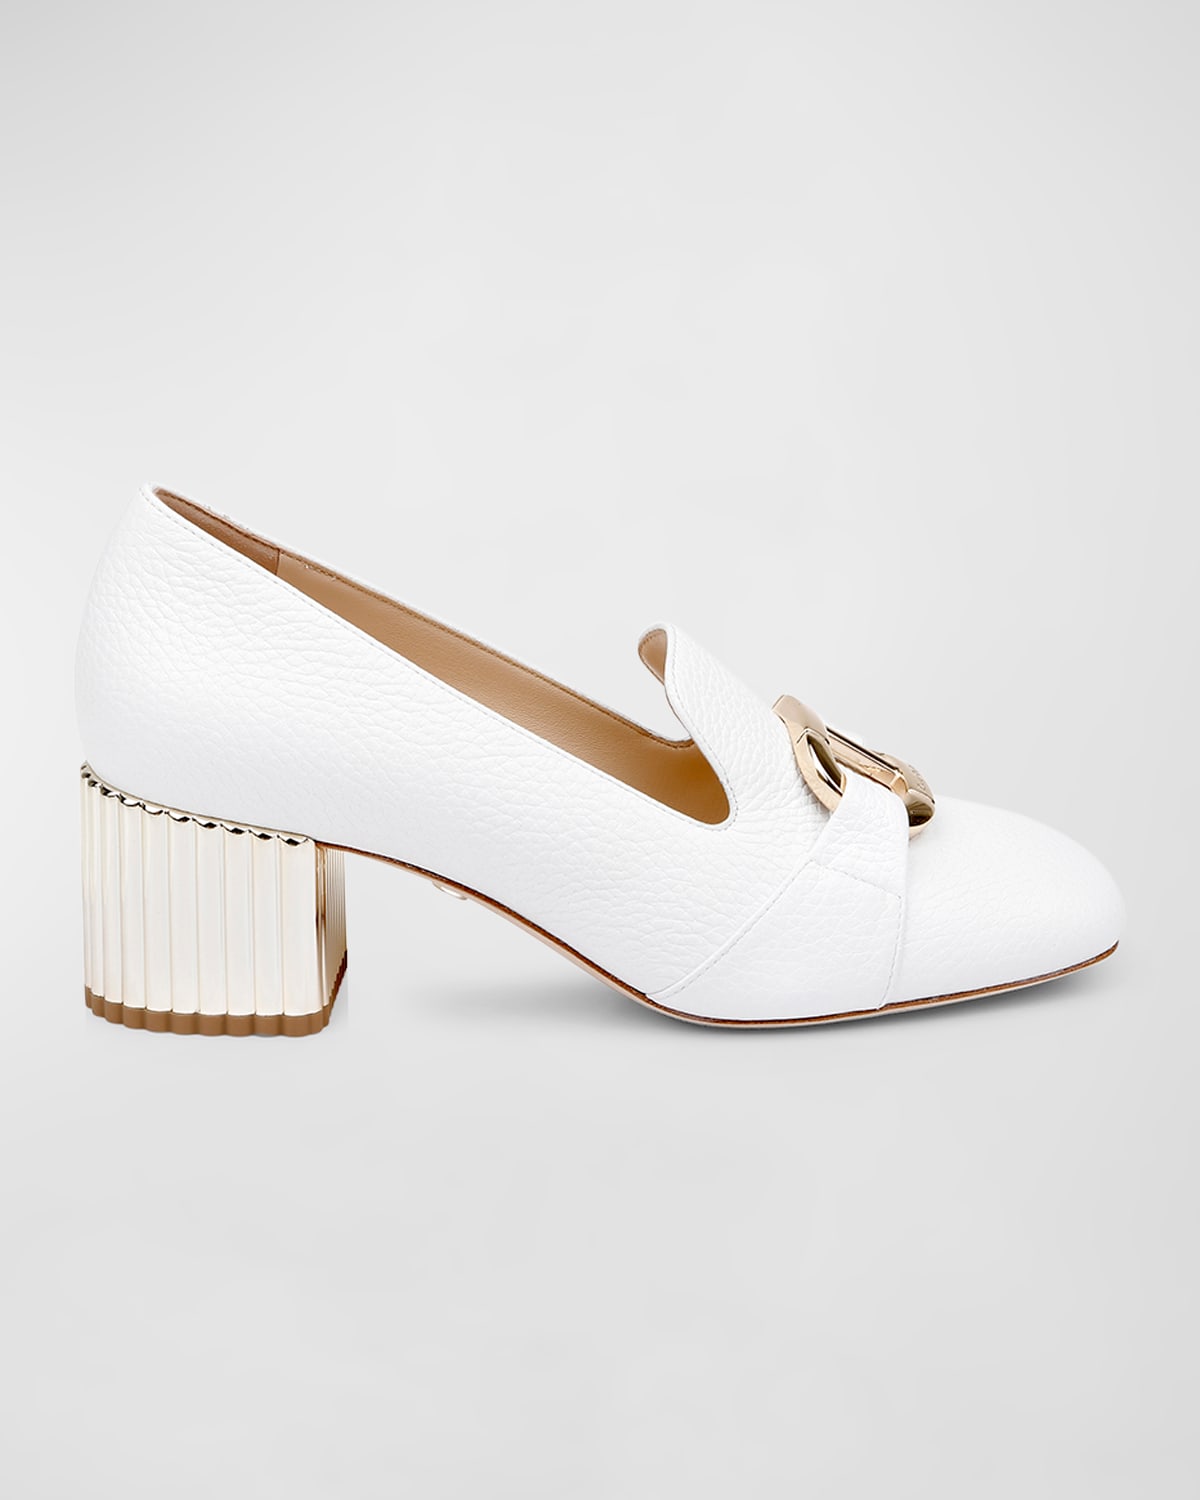 Dee Ocleppo Michelle Leather Buckle Loafer Pumps In White